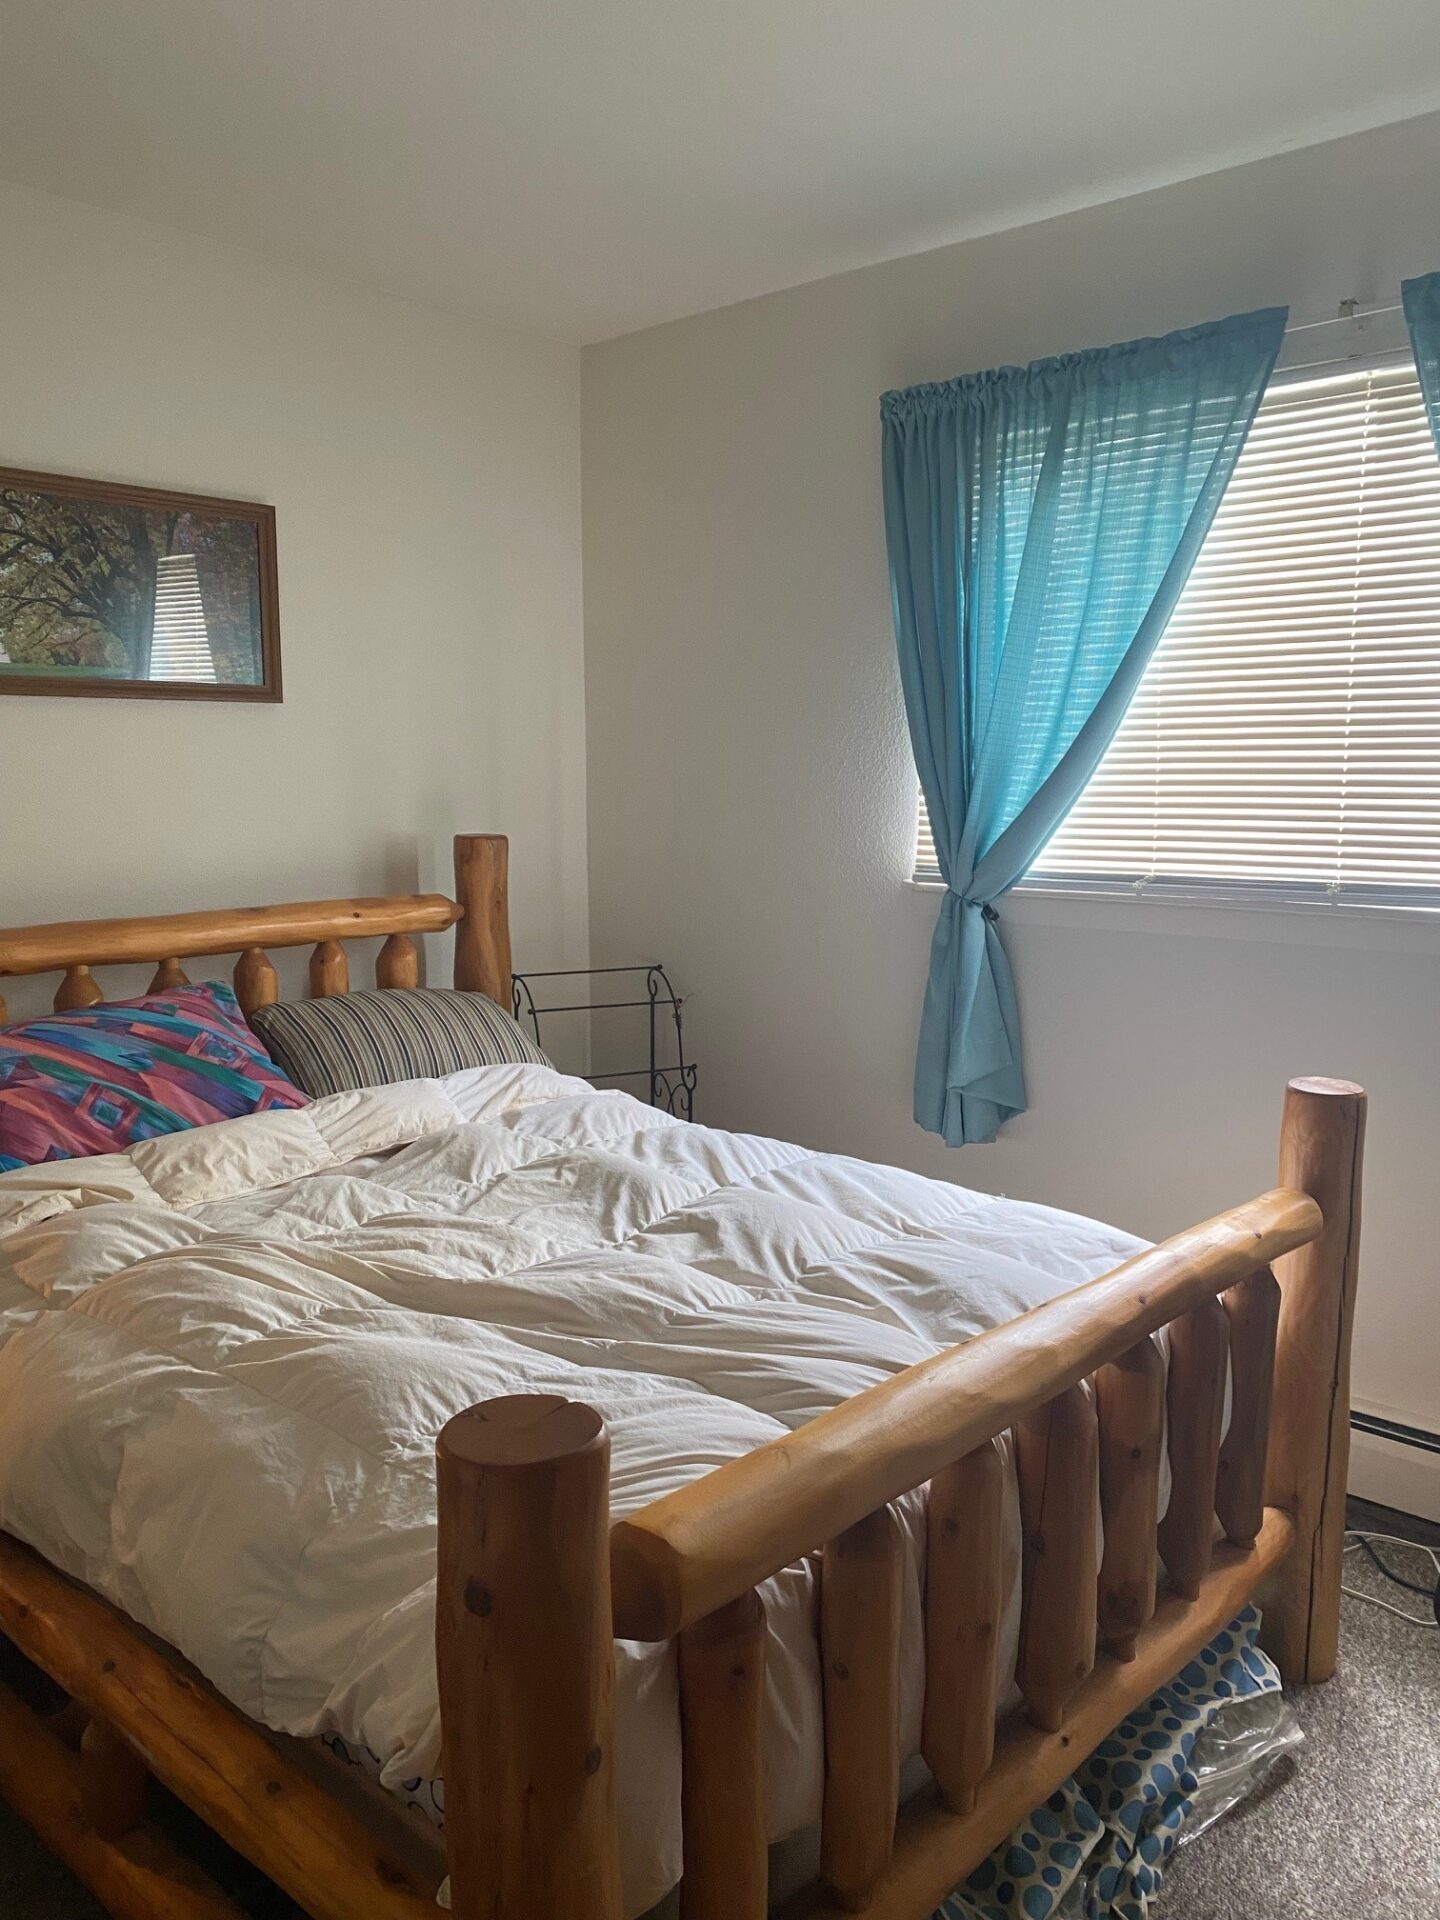 Ridgeview apartments bedroom with blue curtains